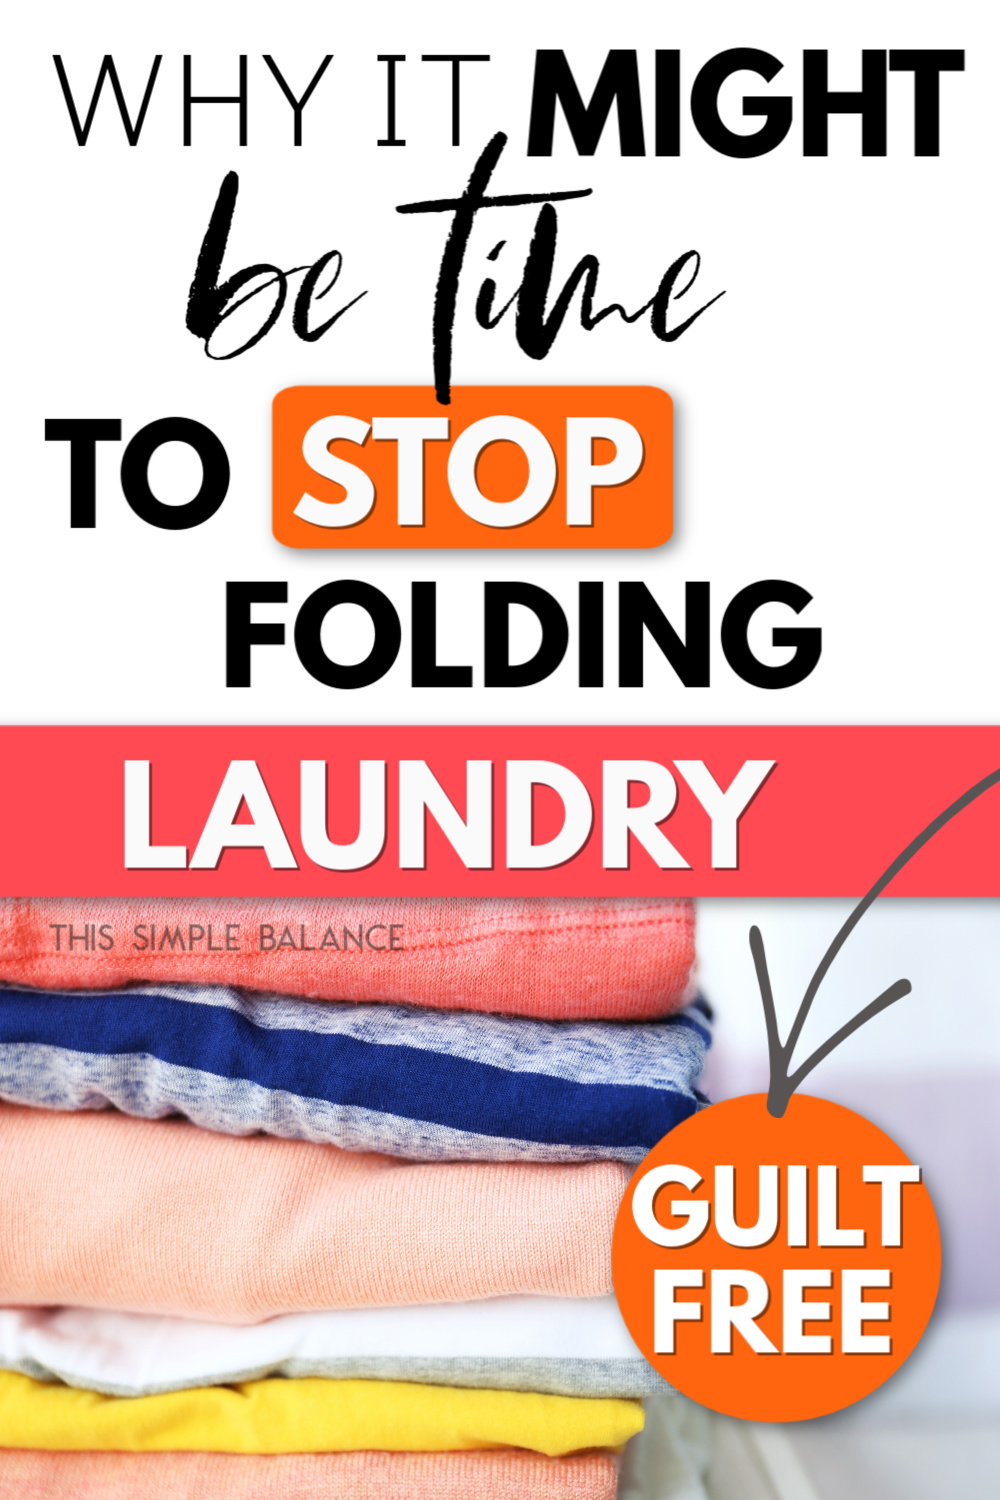 stack of folded laundry, with text overlay, "why it might be time to stop folding laundry guilt-free"